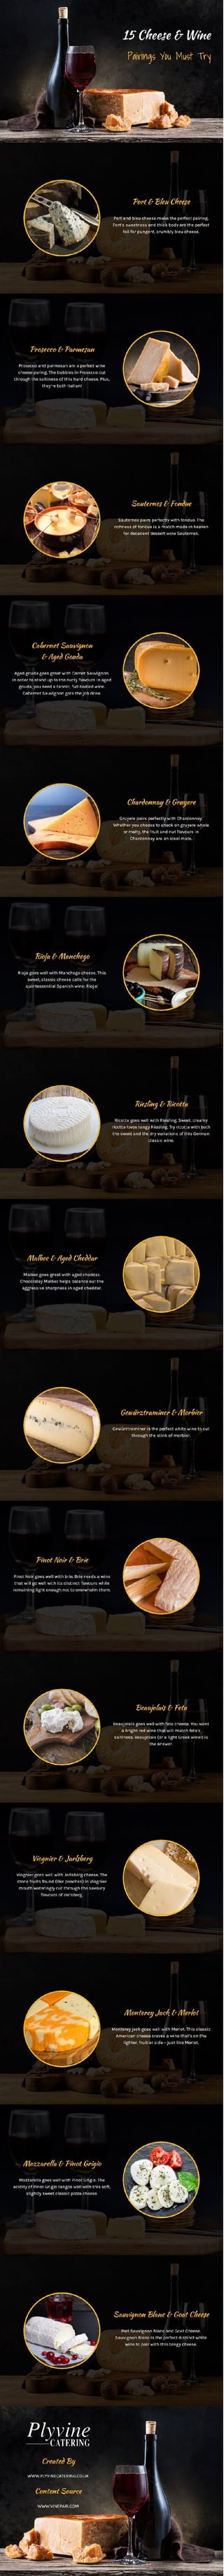 15 cheese &amp; wine pairings you must try